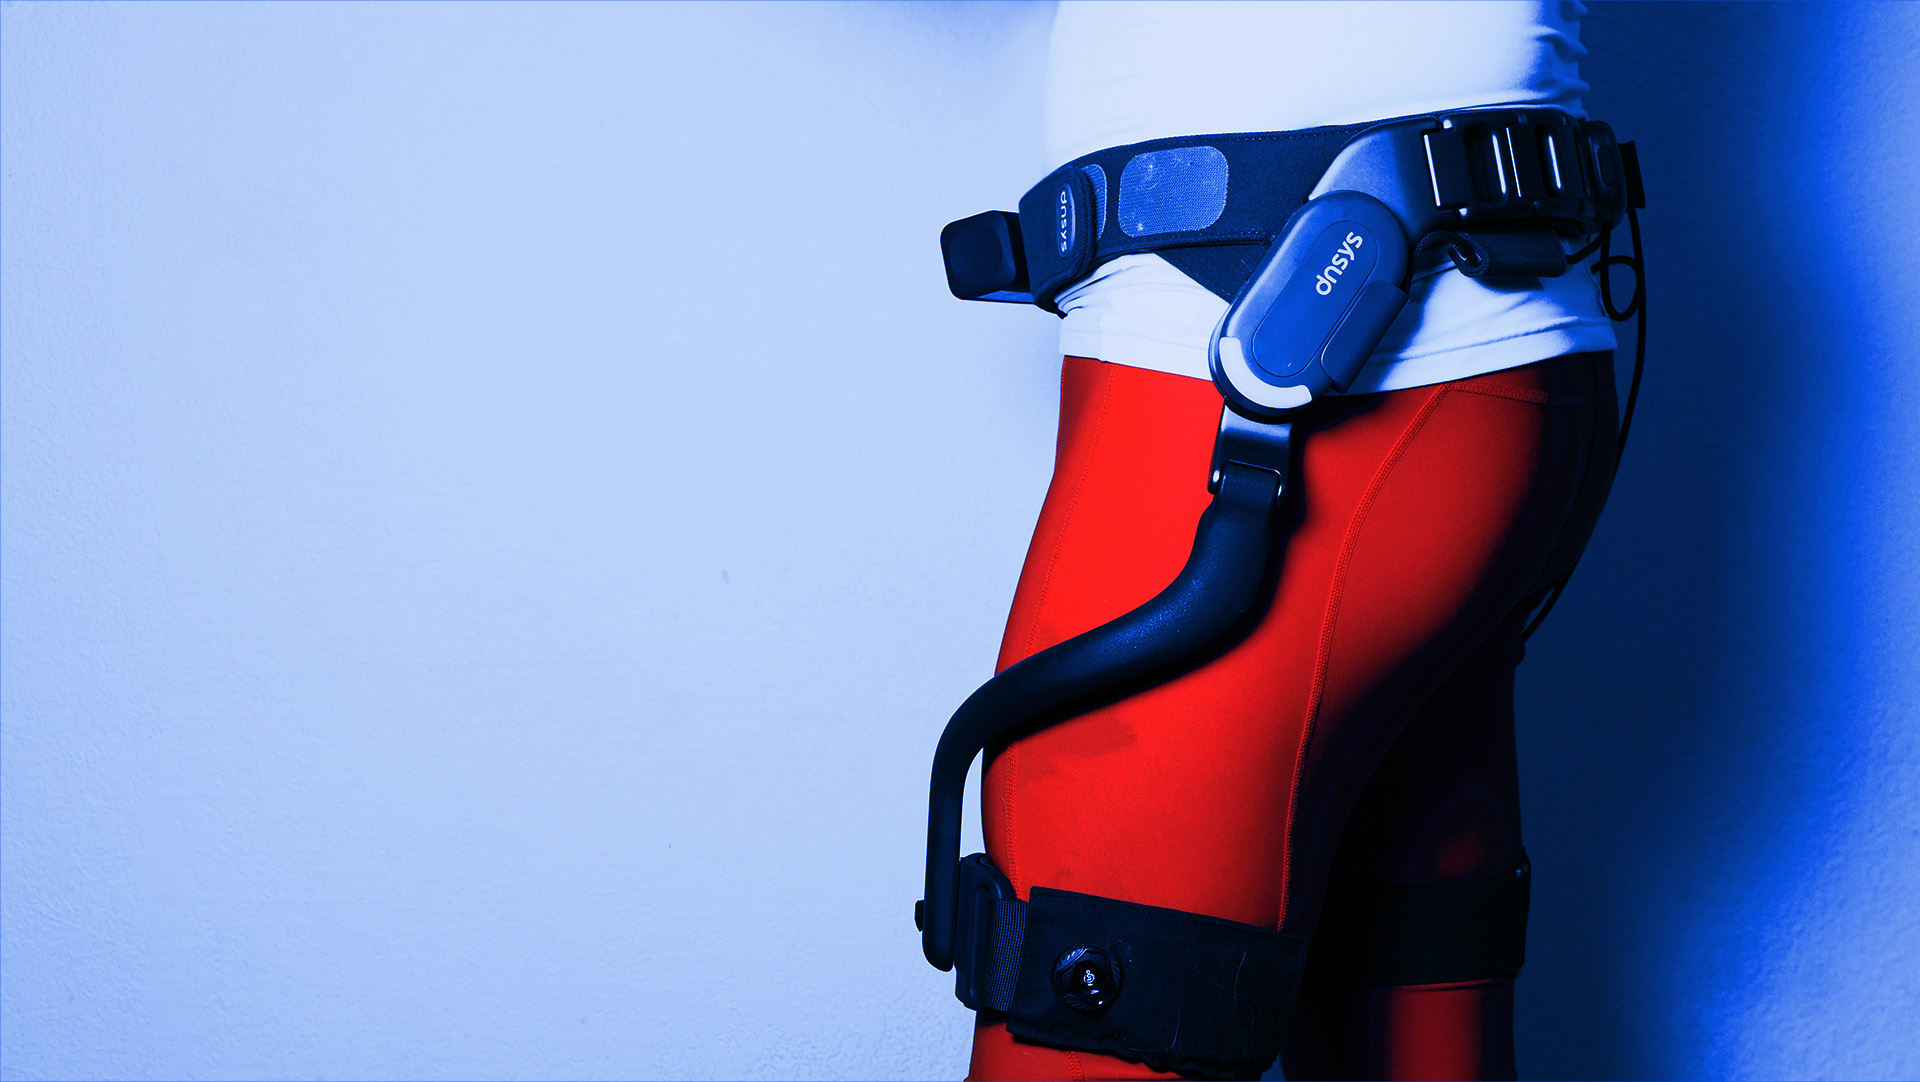 Reviewing the DNSYS X1 Exoskeleton